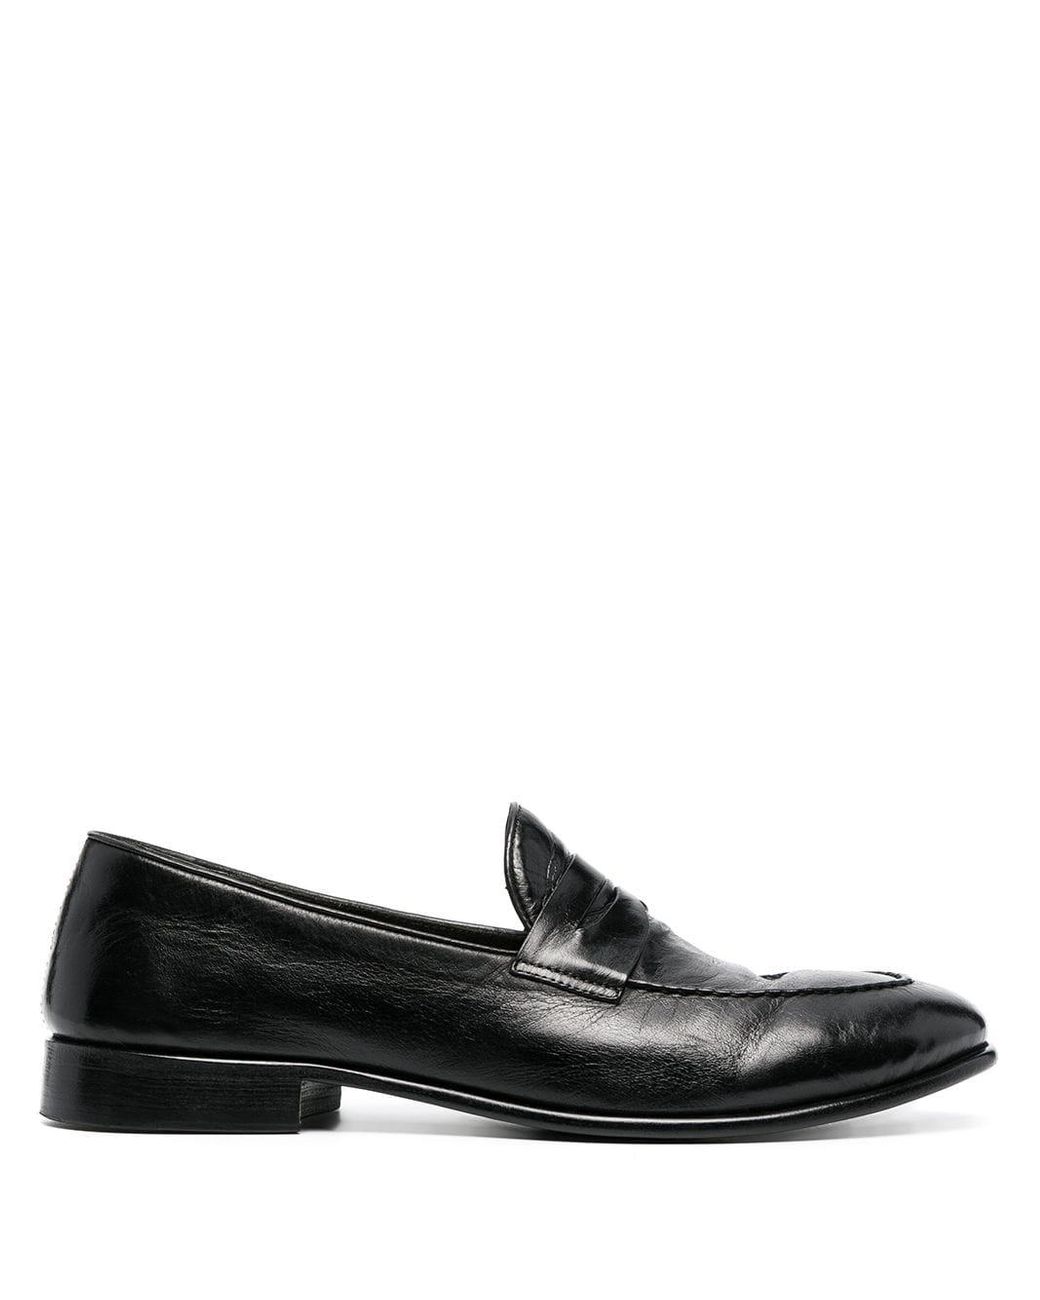 Alberto Fasciani Penny-slot Leather Loafers in Black for Men - Lyst